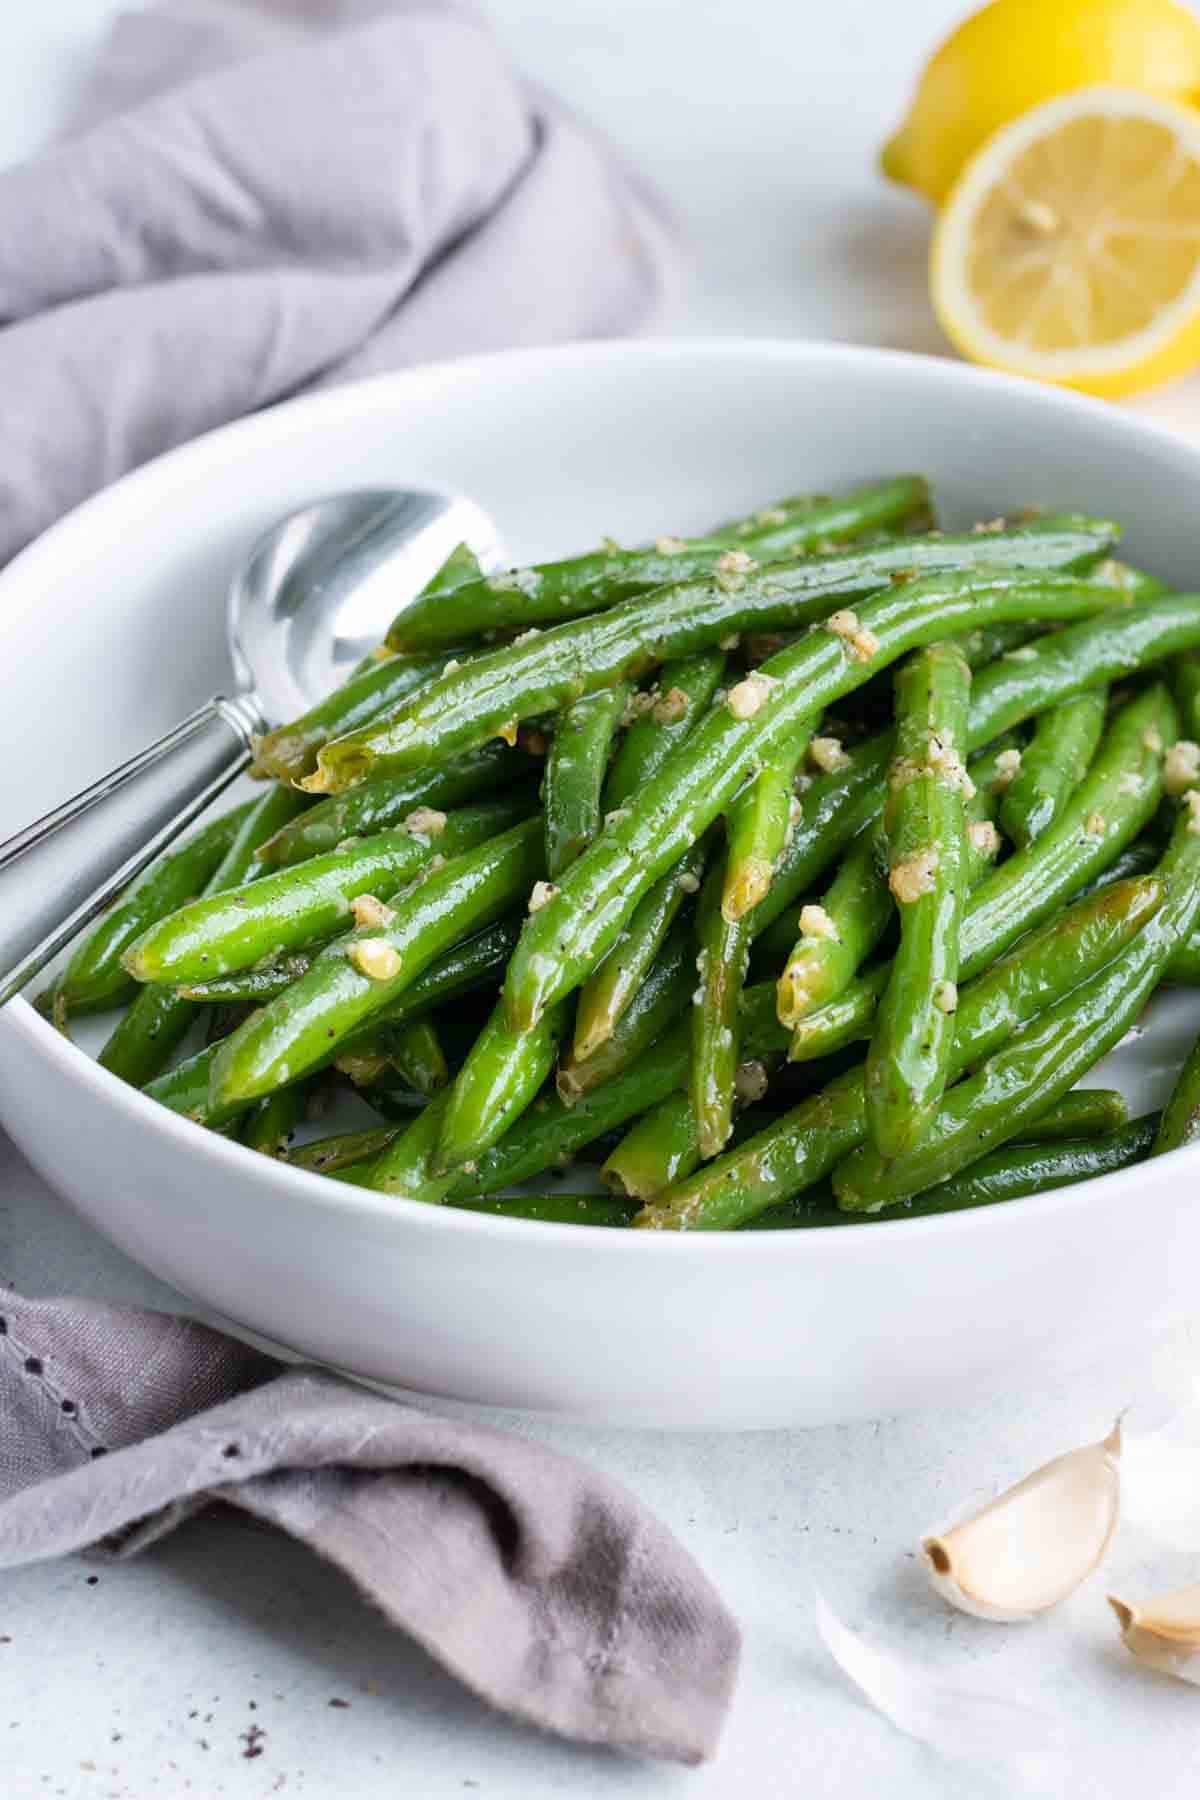 Green beans are topped with chopped nuts.